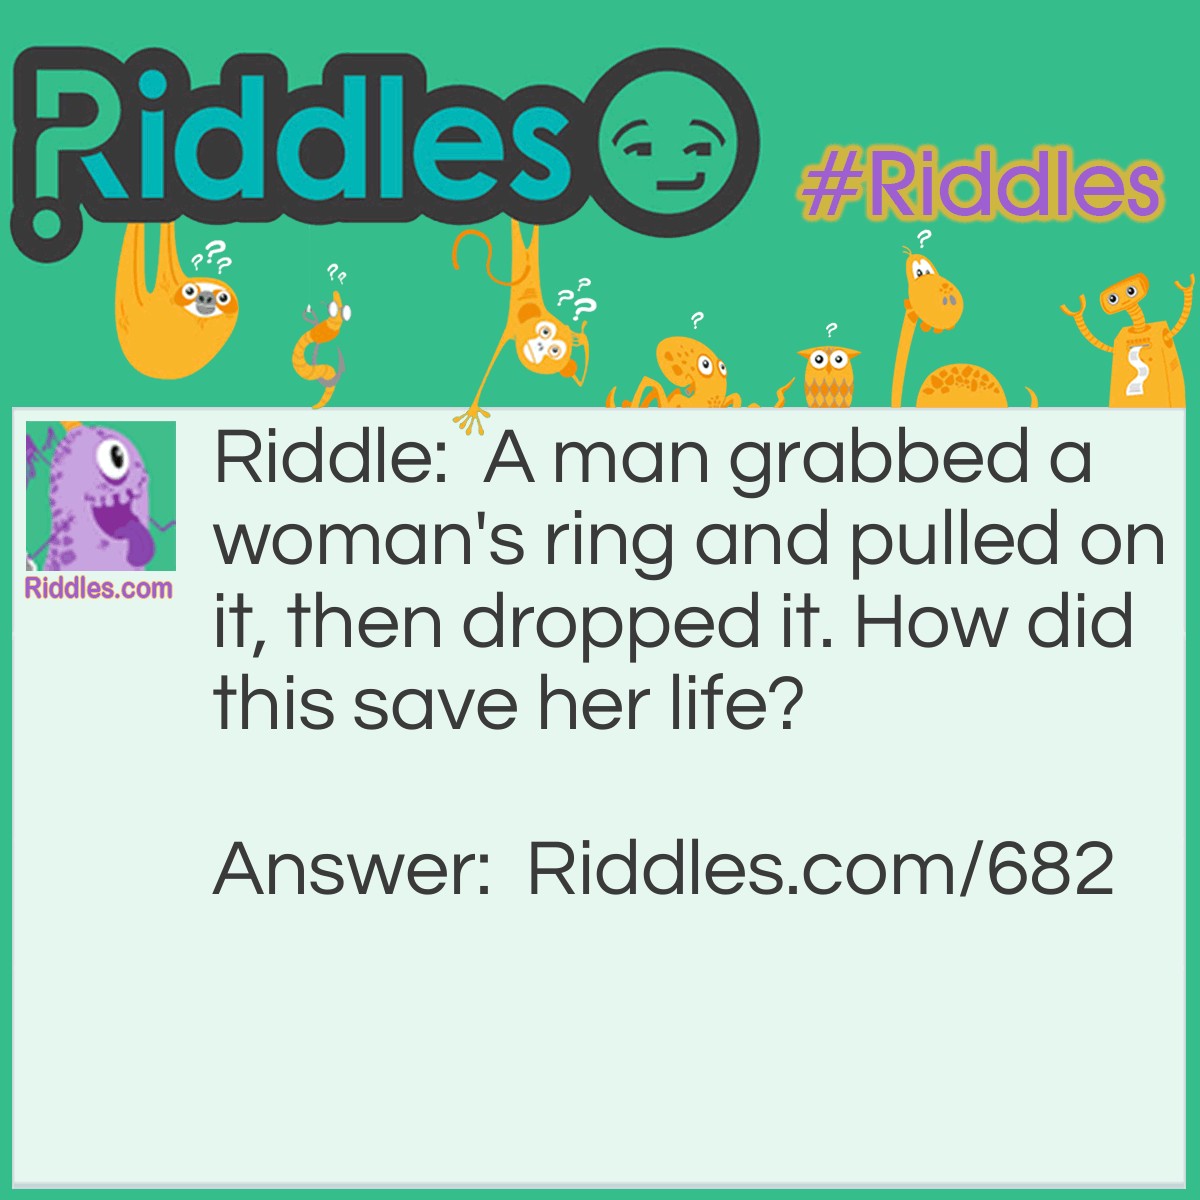 Riddle: A man grabbed a woman's ring and pulled on it, then dropped it. How did this save her life? Answer: They were skydiving, and she was unconscious. He pulled the ripcord ring for her, and the parachute opened.